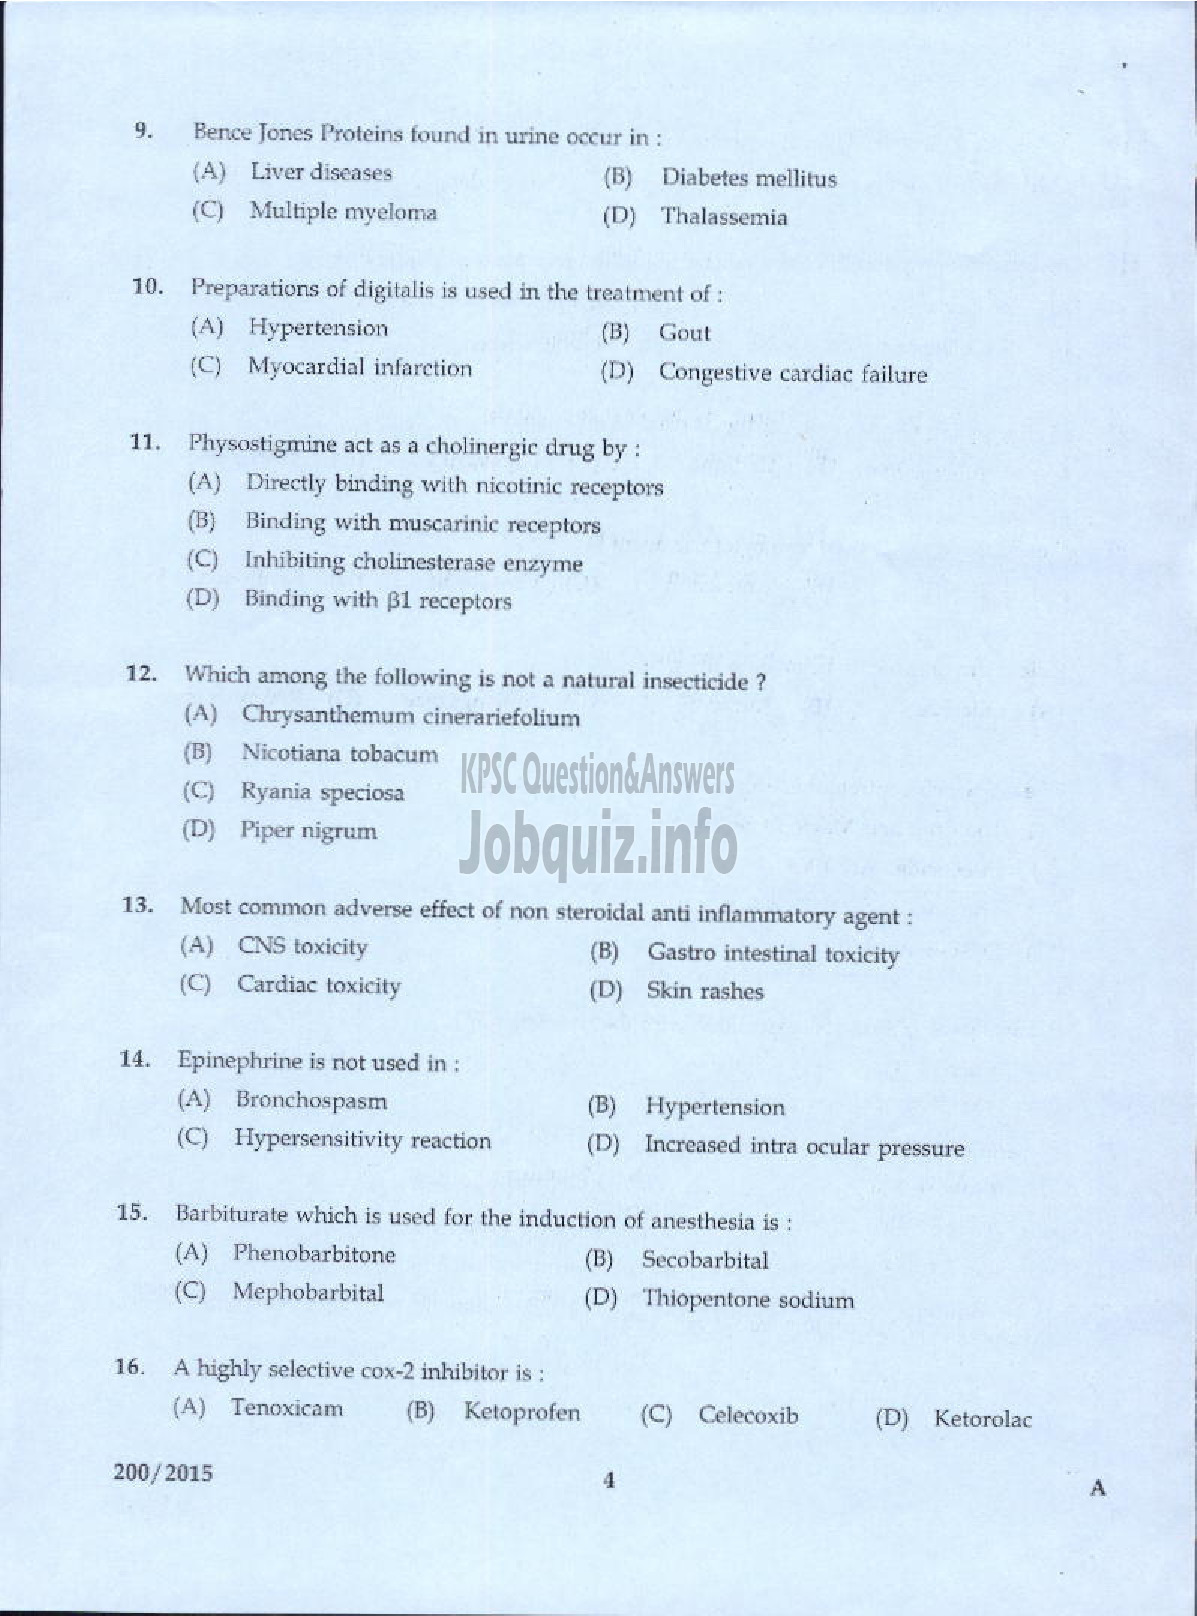 Kerala PSC Question Paper - PHARMACIST GR II HEALTH SERVICES-2